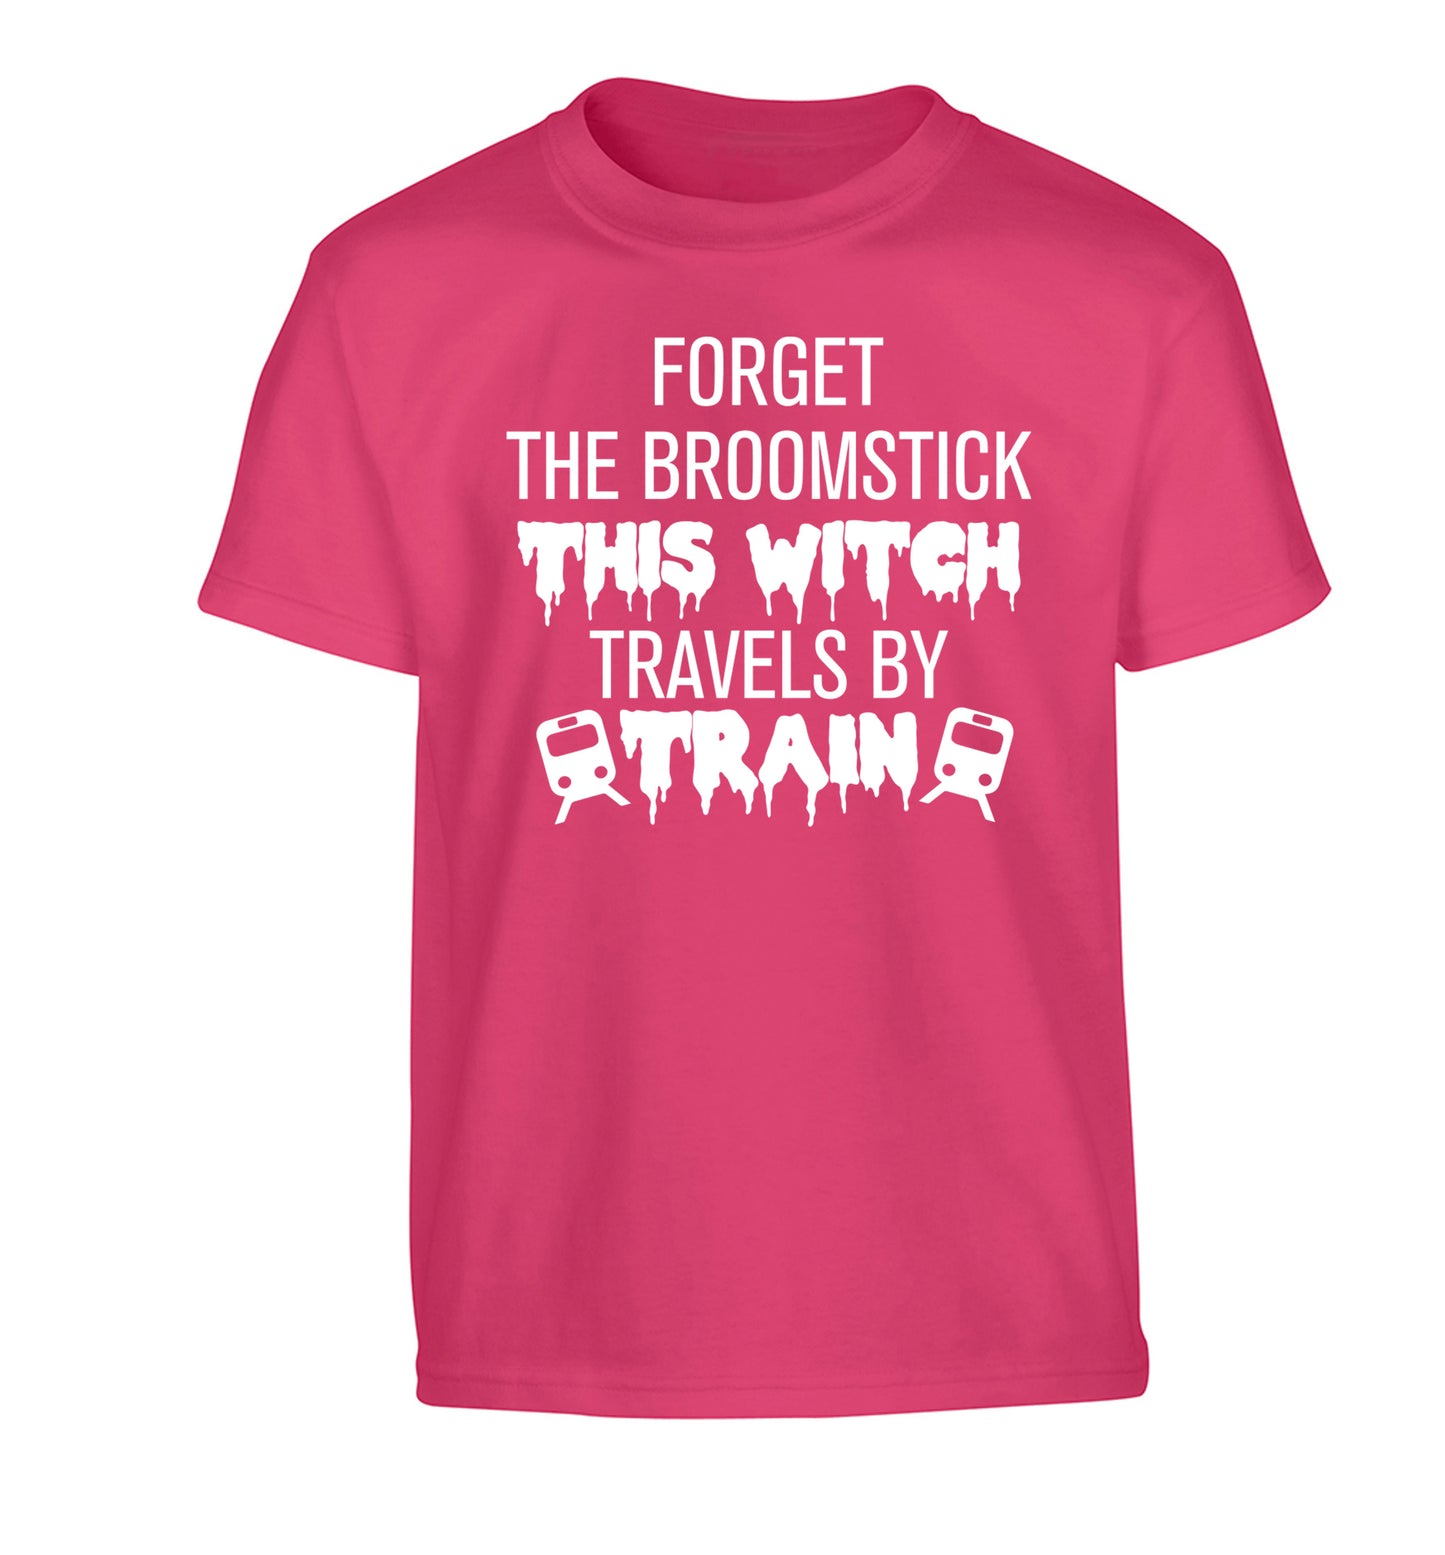 Forget the broomstick this witch travels by train Children's pink Tshirt 12-14 Years